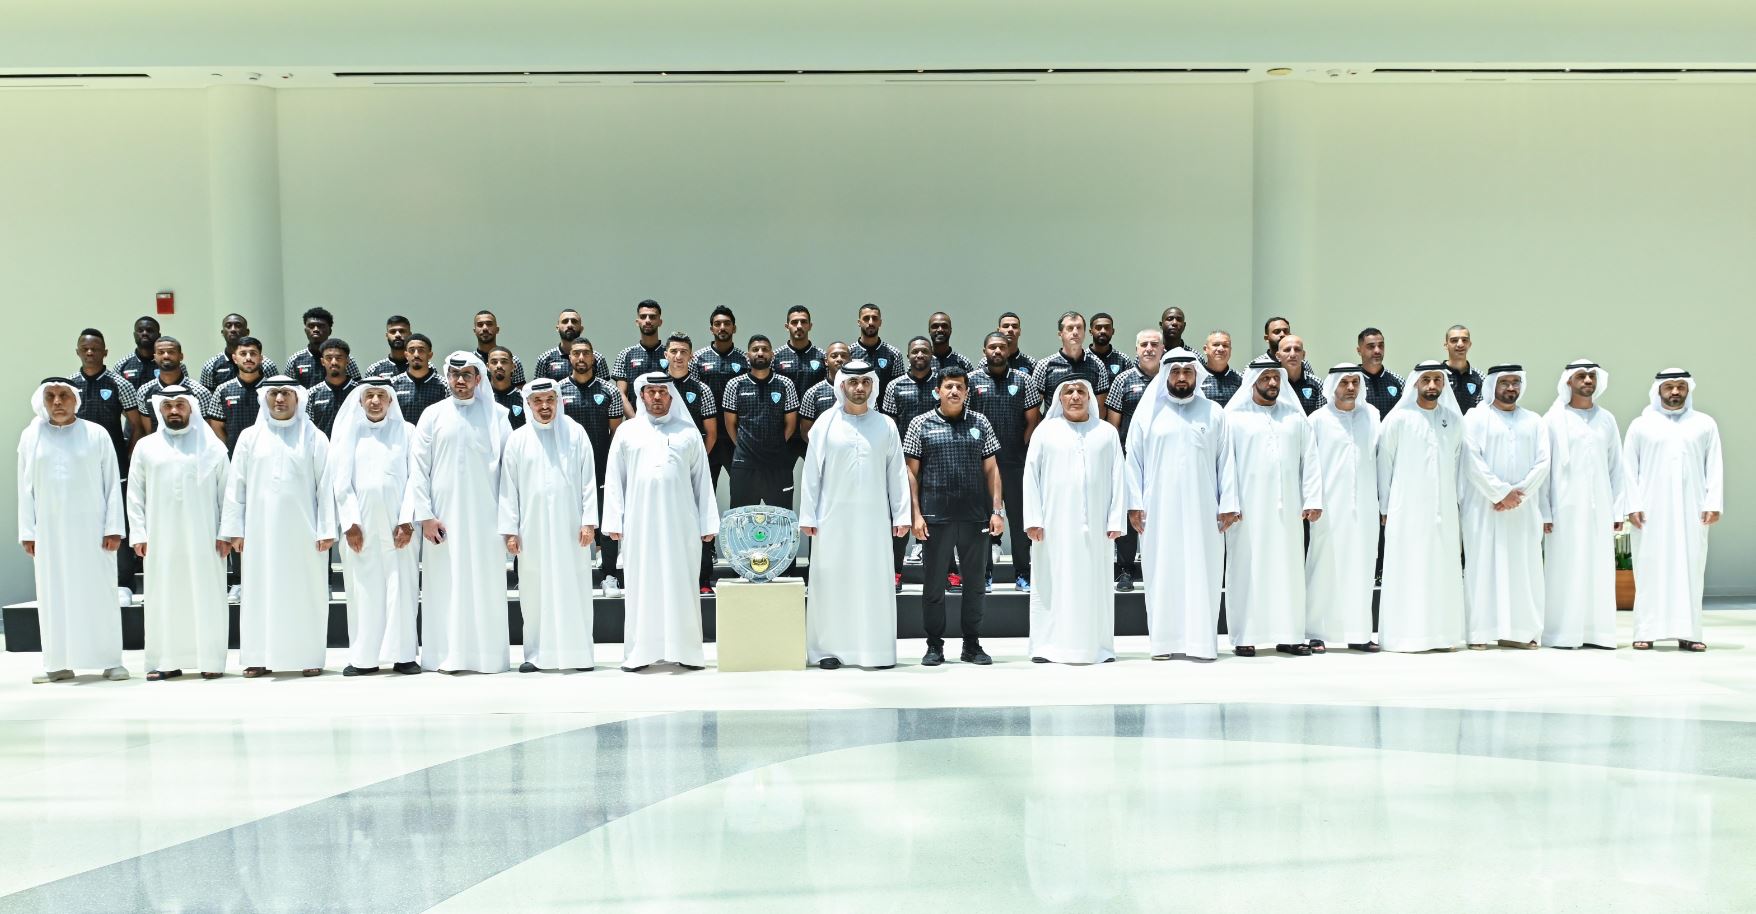 Mansour bin Mohammed receives the Hatta team, the first division champion